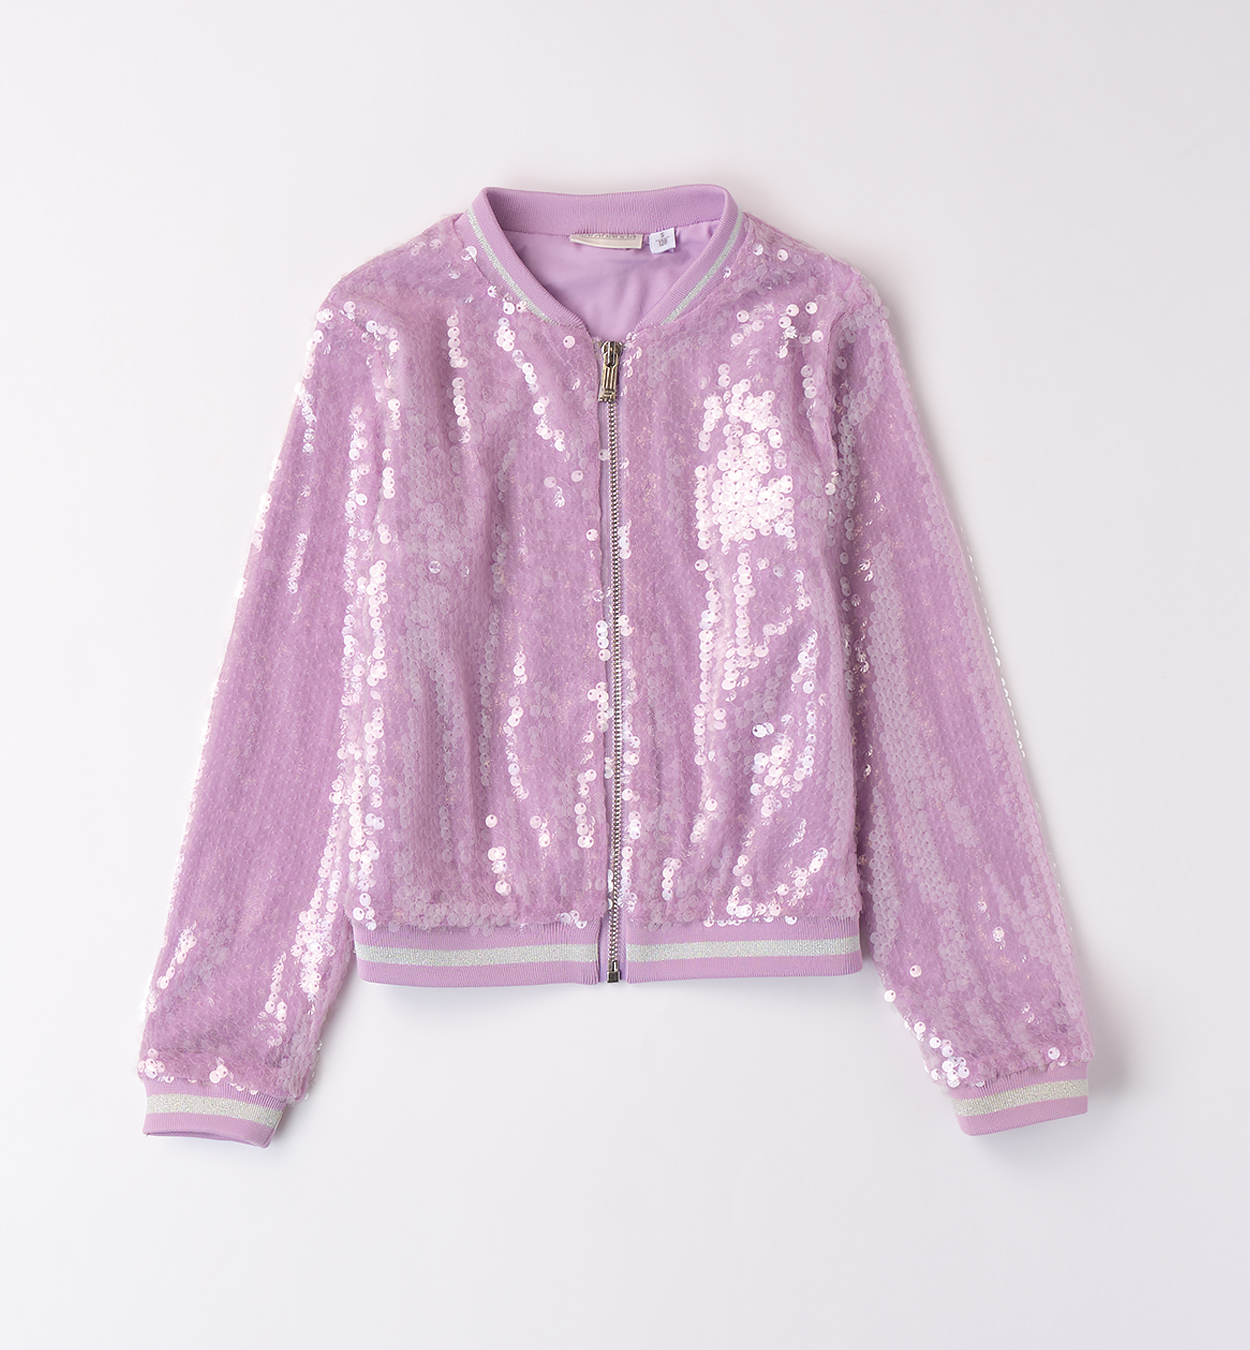 Girls' jacket with sequins